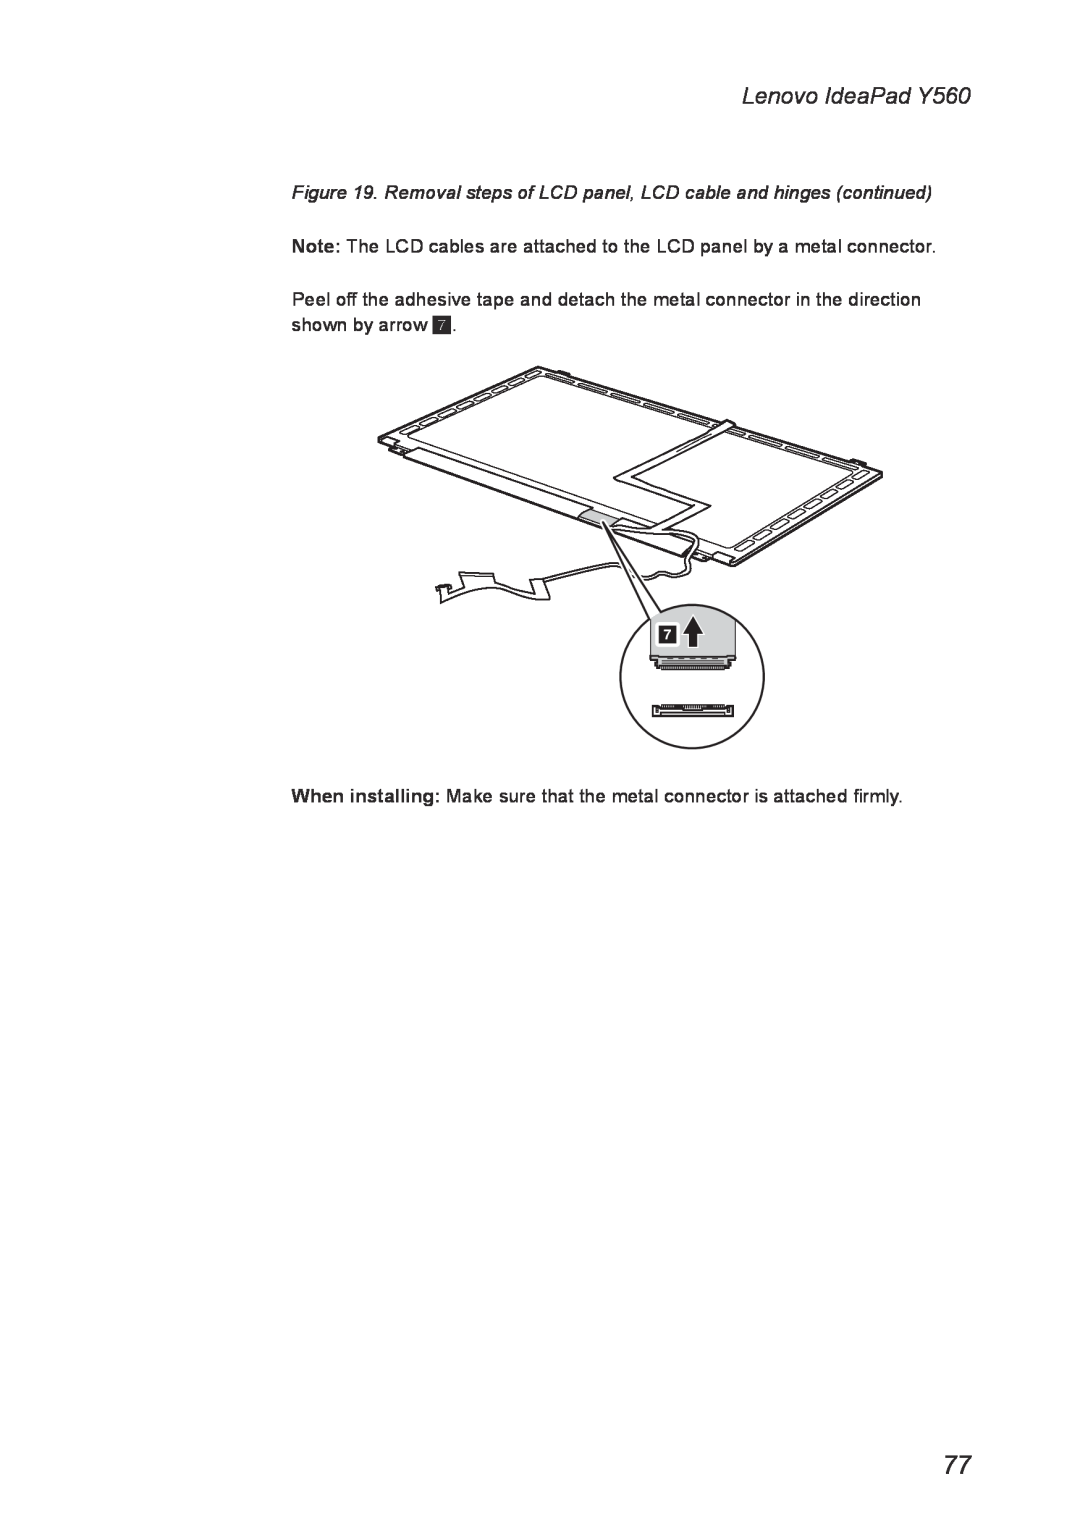 Lenovo manual Lenovo IdeaPad Y560, Removal steps of LCD panel, LCD cable and hinges continued 